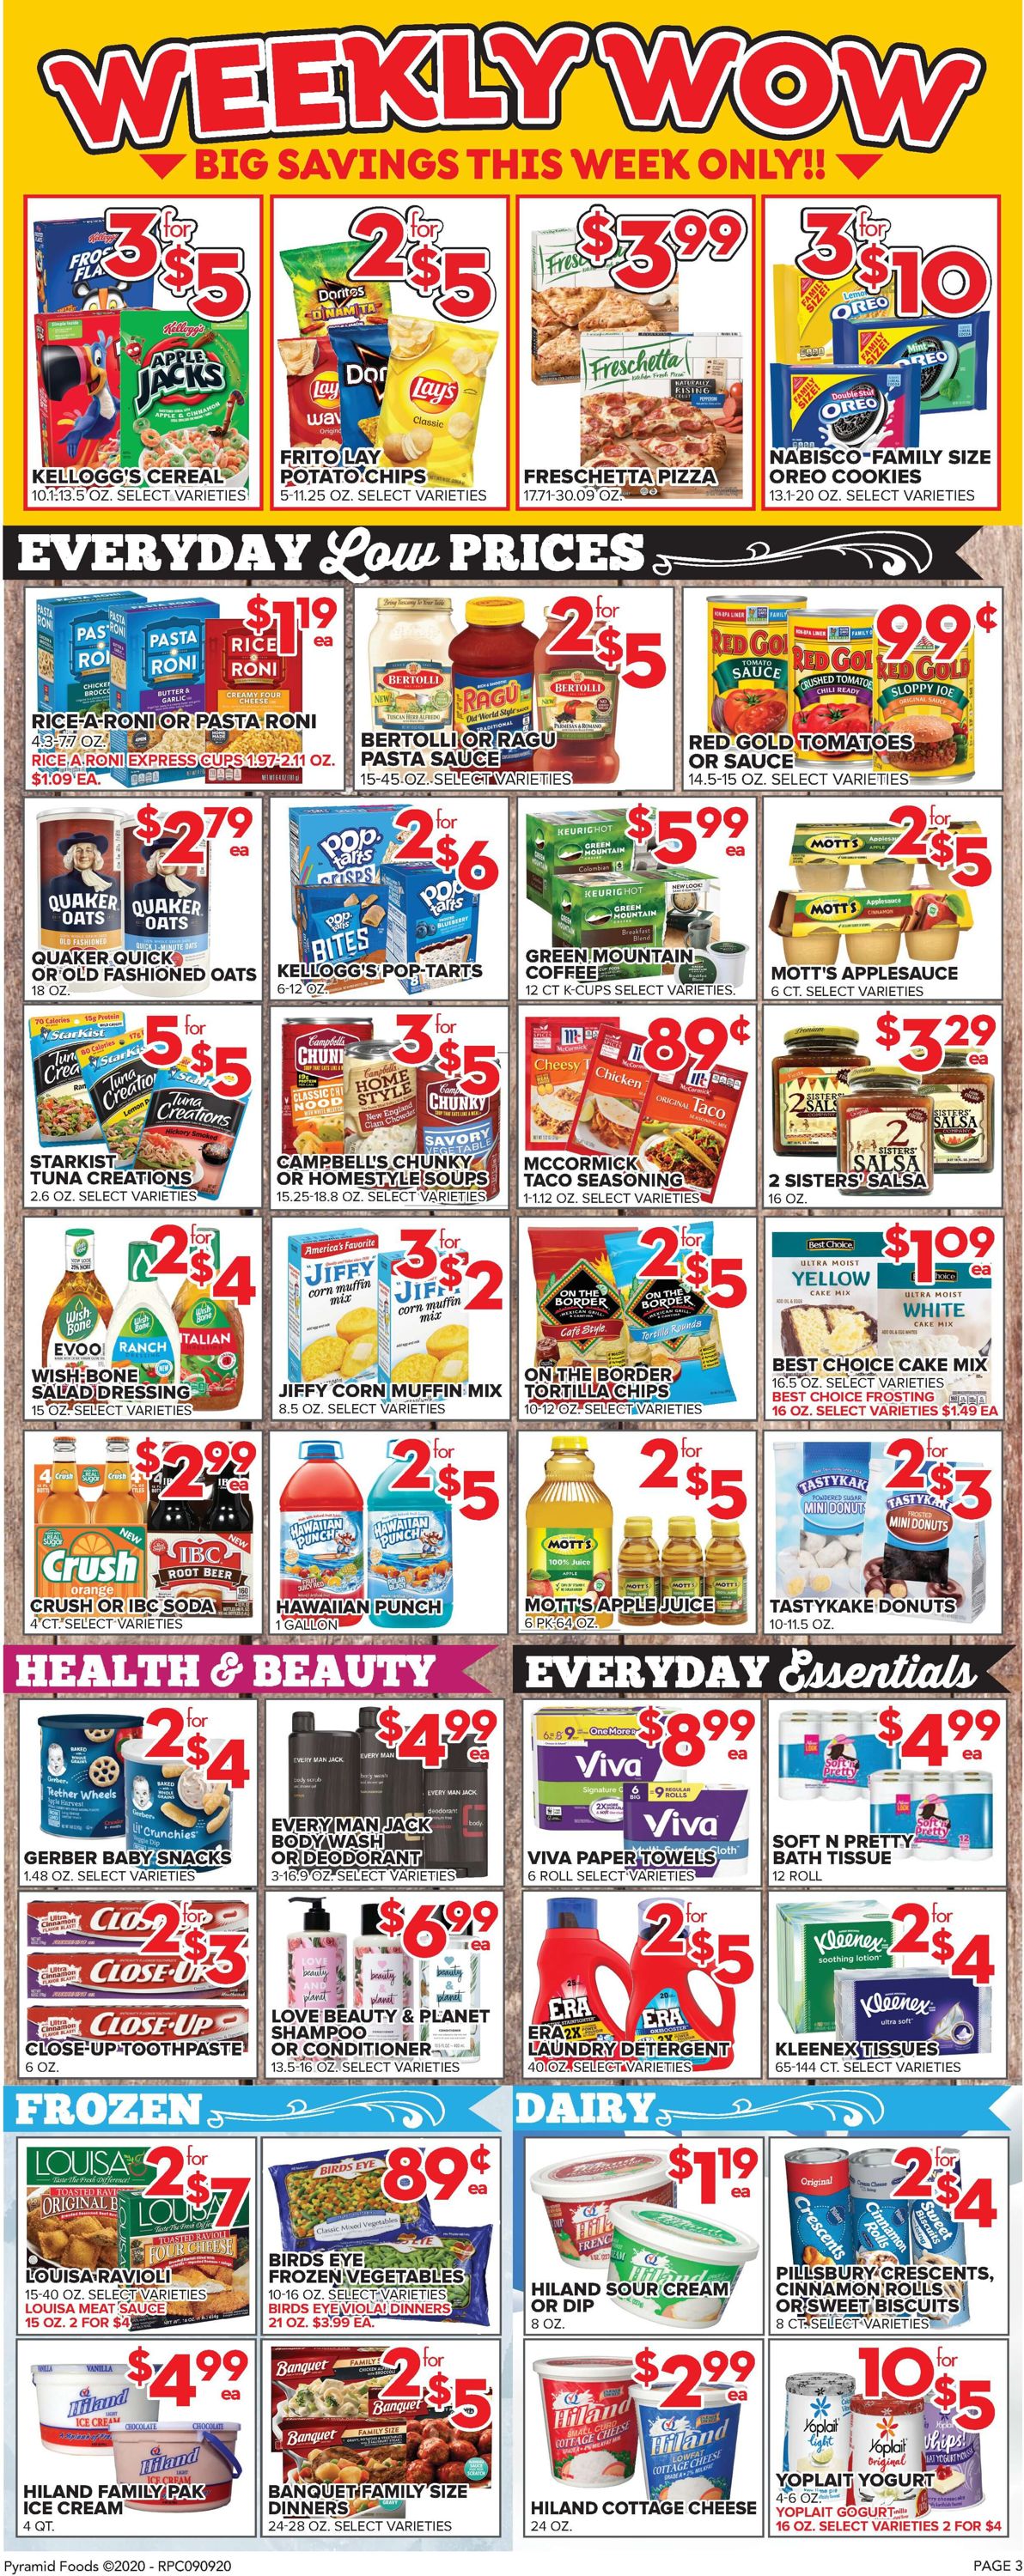 Price Cutter Weekly Ad Circular - valid 09/09-09/15/2020 (Page 3)